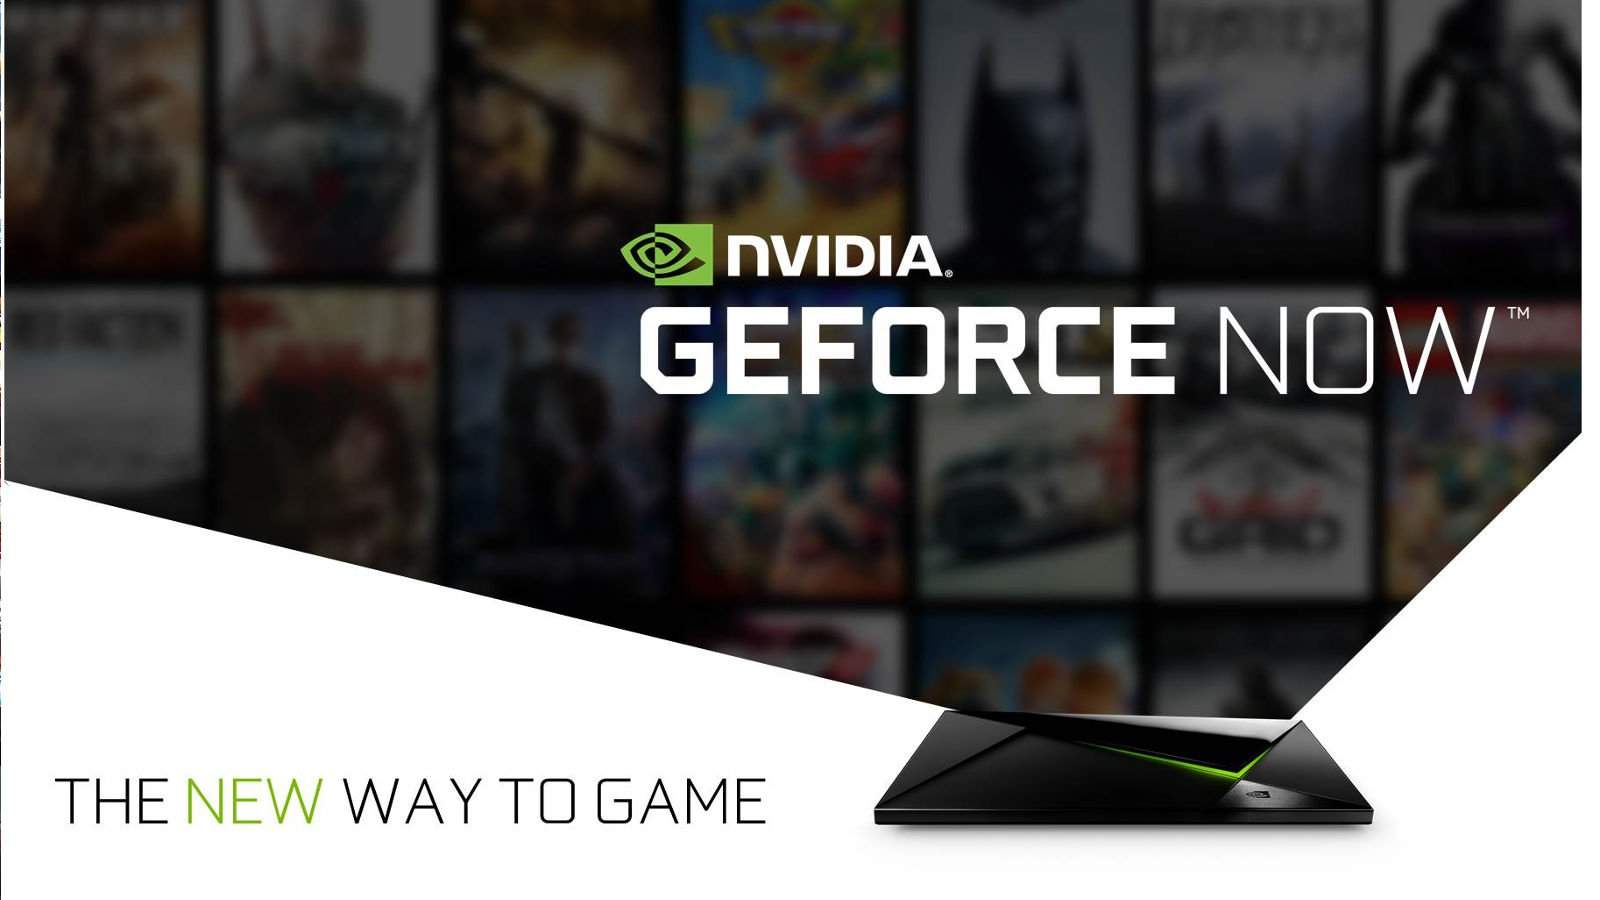 Vamers - FYI - Gadgetology - Nvidia GeForce Now is bringing high-end gaming to Mac - 02